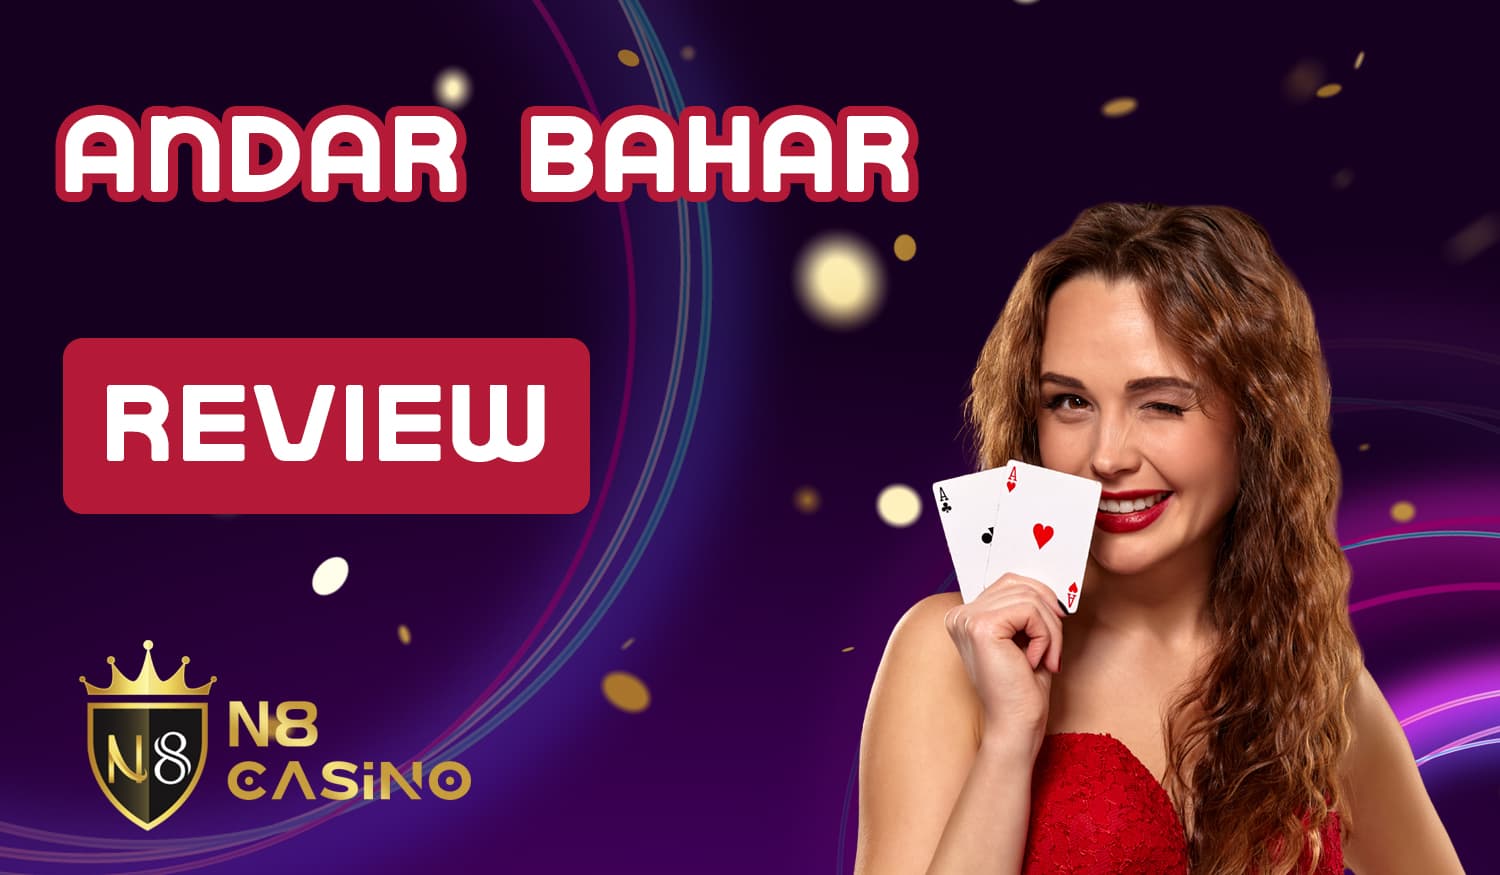 N8 Casino online  review for playing Andar Bahar